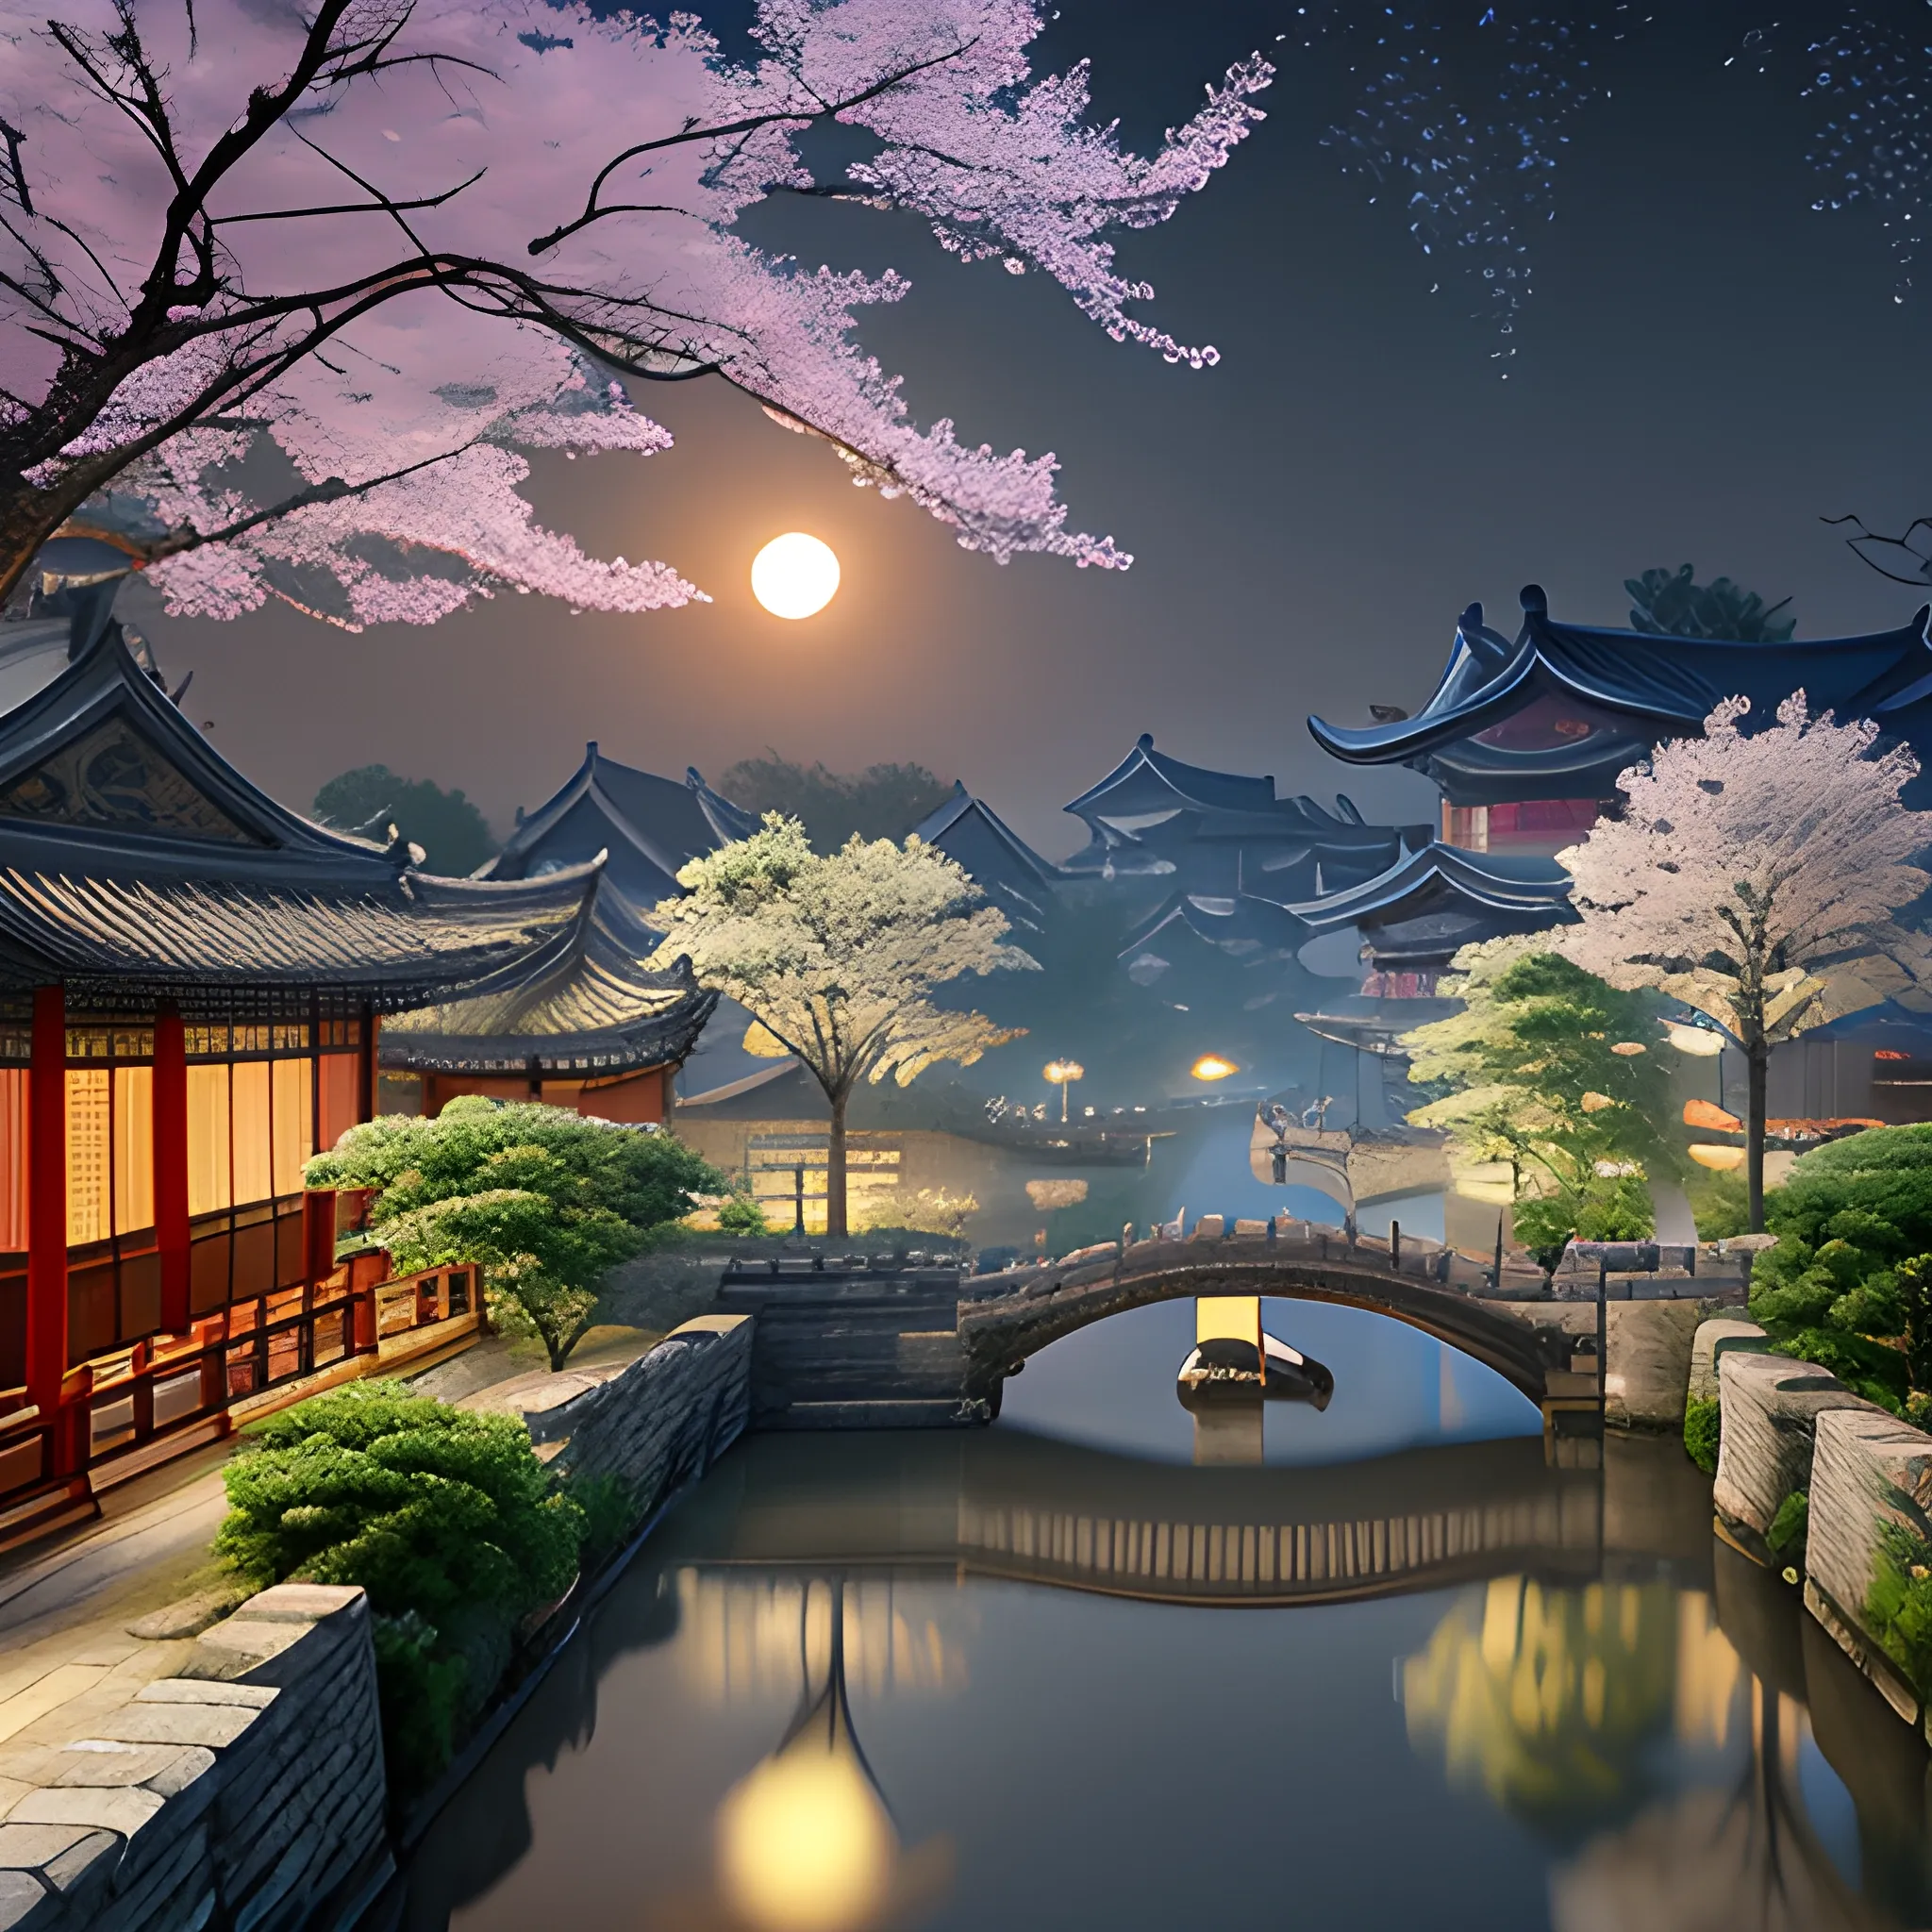 Ancient Chinese ultra-realistic CG rendering, with a creek, on the water town of Jiangnan, in the evening, Chinese architecture, maple trees with milky leaves, snow scenes, moon in the sky, HD --ar 9:16 